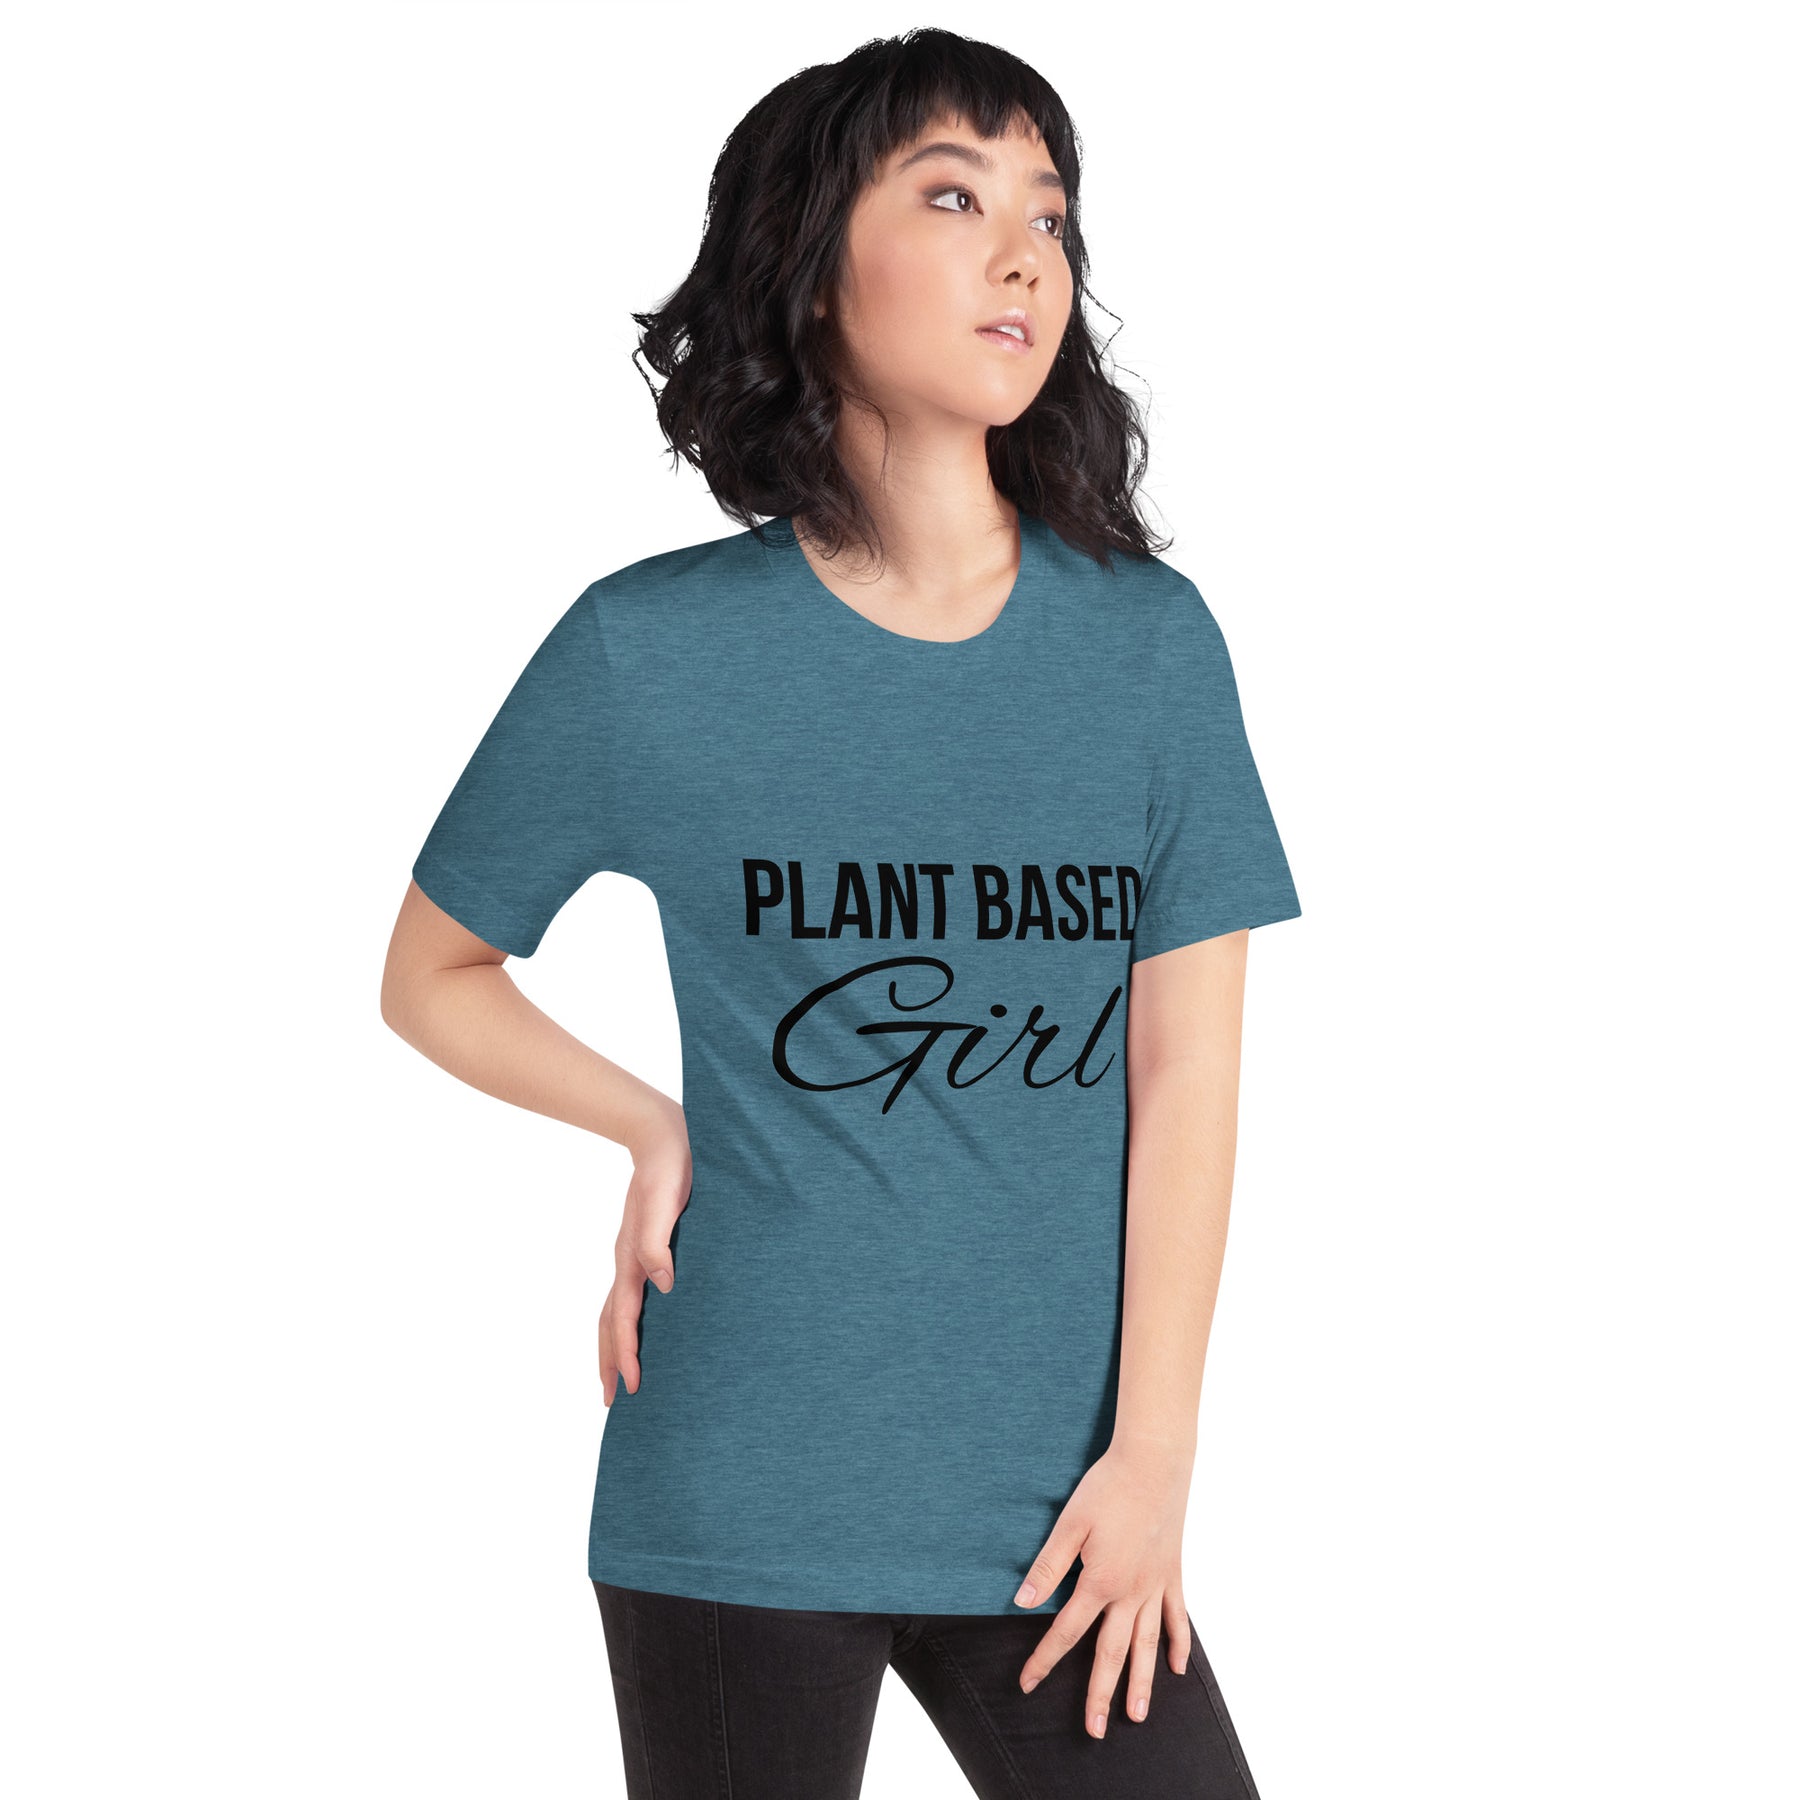 PLANT BASED GIRL Colored t-shirt